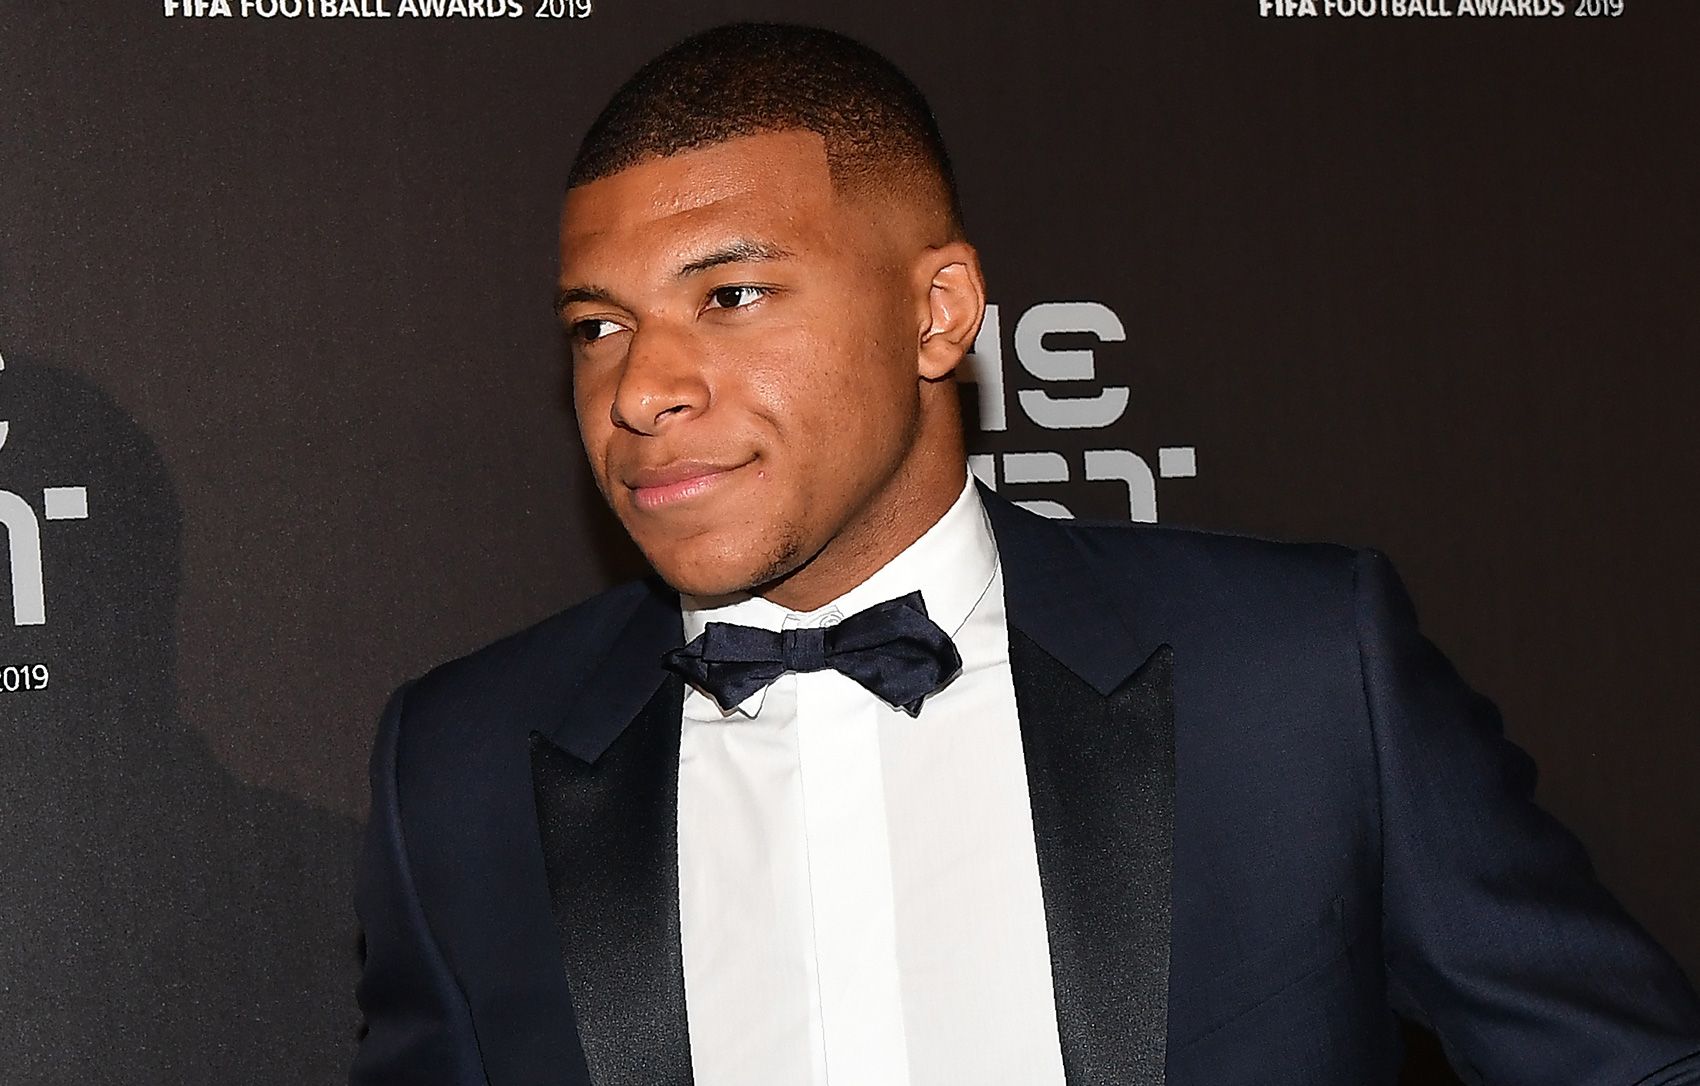 Kylian Mbappé In the gala of the prizes The Best